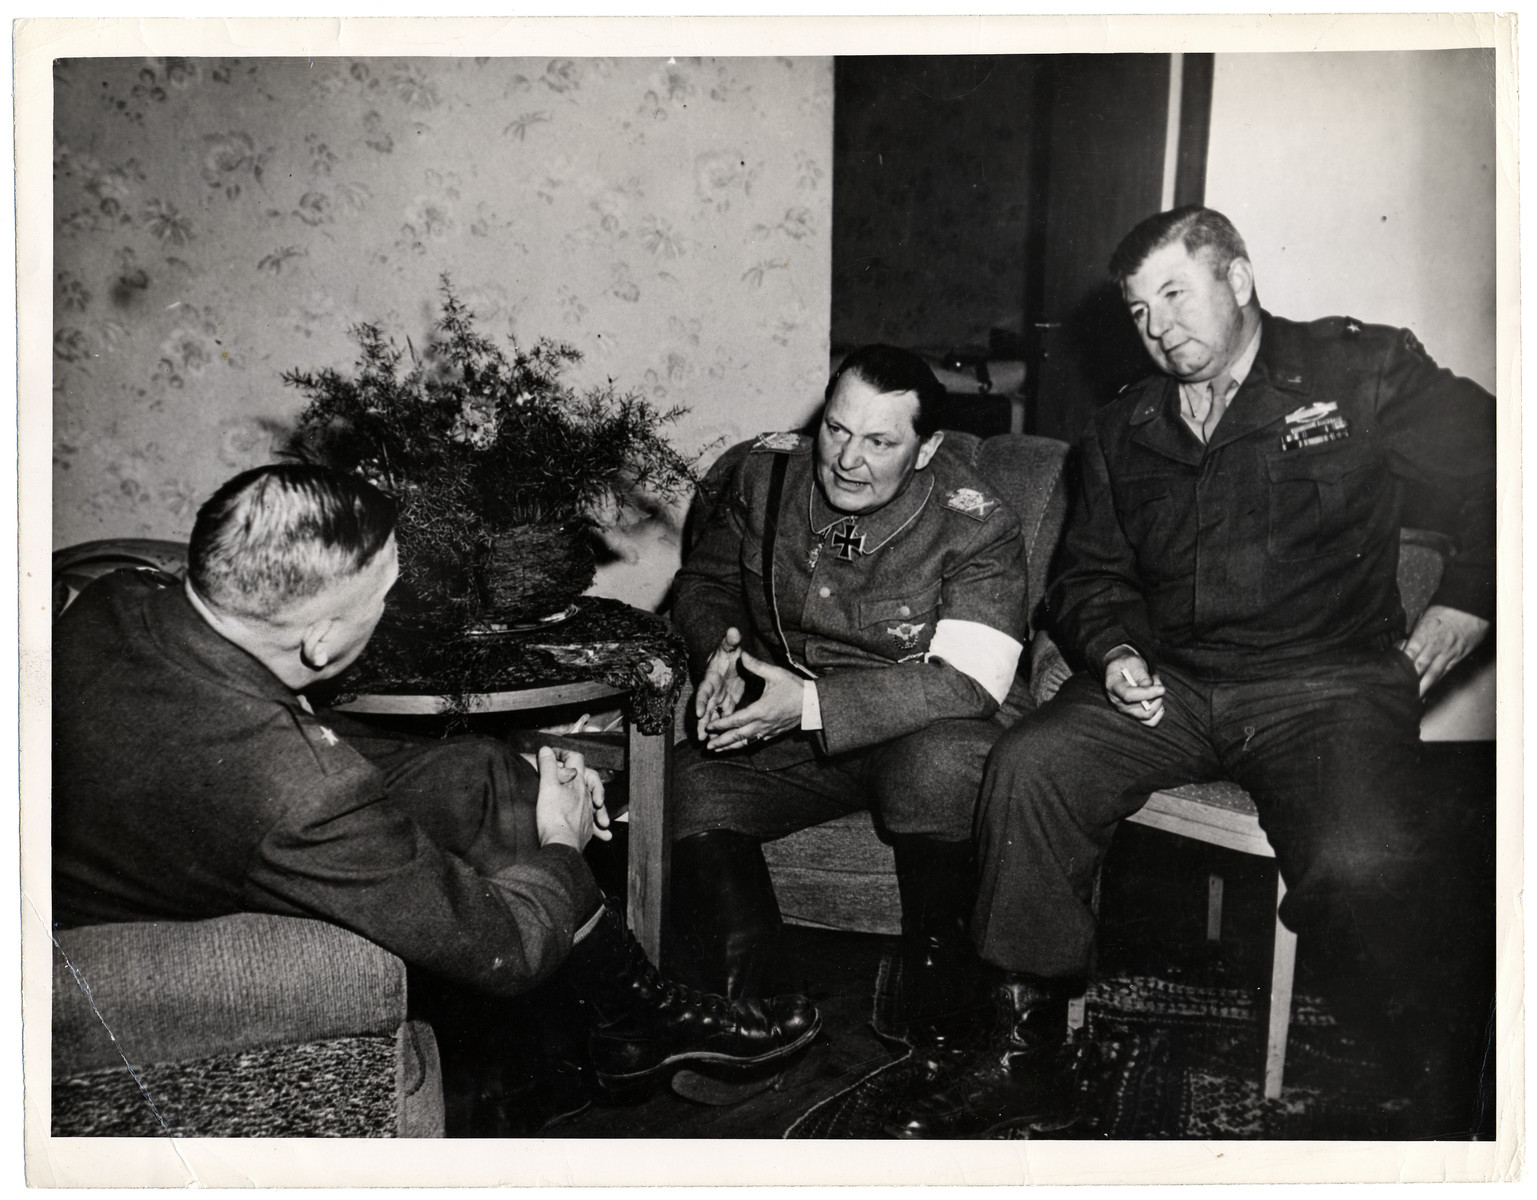 Hermann Goering (center) talks with Brigadier General Robert J. Stack, Assistant Commander of the 36th Infantry Division (right) and Major General John Dahlquist, Commander of the 36th Division after his arrest in the Grand Hotel at Kitzbuehl.

Original Caption: "Herman Goering, second to Adolf Hitler in the Nazi Party hierarchy, was captured by troops of the 36th Division, Seventh U.S. Army, at Kitzbuehl, Austria, it was announced May 9, 1945, by Supreme Headquarters Allied Expeditionary Force. He surrendered to Brigadier Gerneral Robert J Stack, Assistant Commander of the 36th Divion. Goering said that the last time he spoke to Hitler was April 24, 1945, when he said he telephoned the Fuhrer and suggested that he assume command as Germany was being cut in two. Goering claimed that Hitler had become outraged, accused him of losing faith and said that the death sentence would be passed."